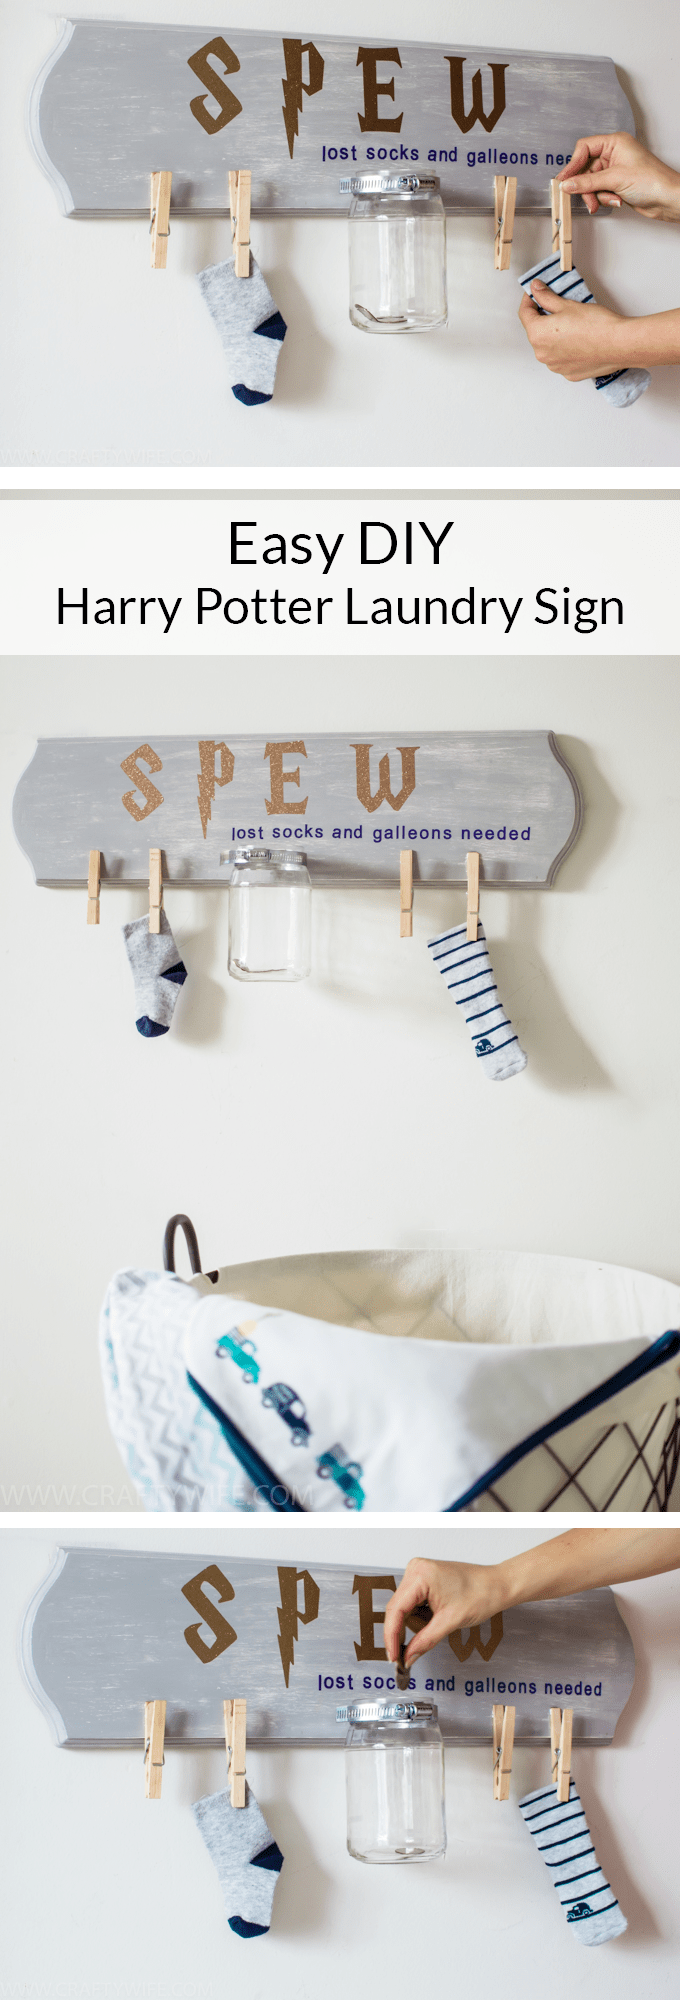 Pay homage to Hermione and S.P.E.W. with this fun Harry Potter laundry sign! Use it to collect lost socks and spare galleons and support the promotion of elfish welfare.